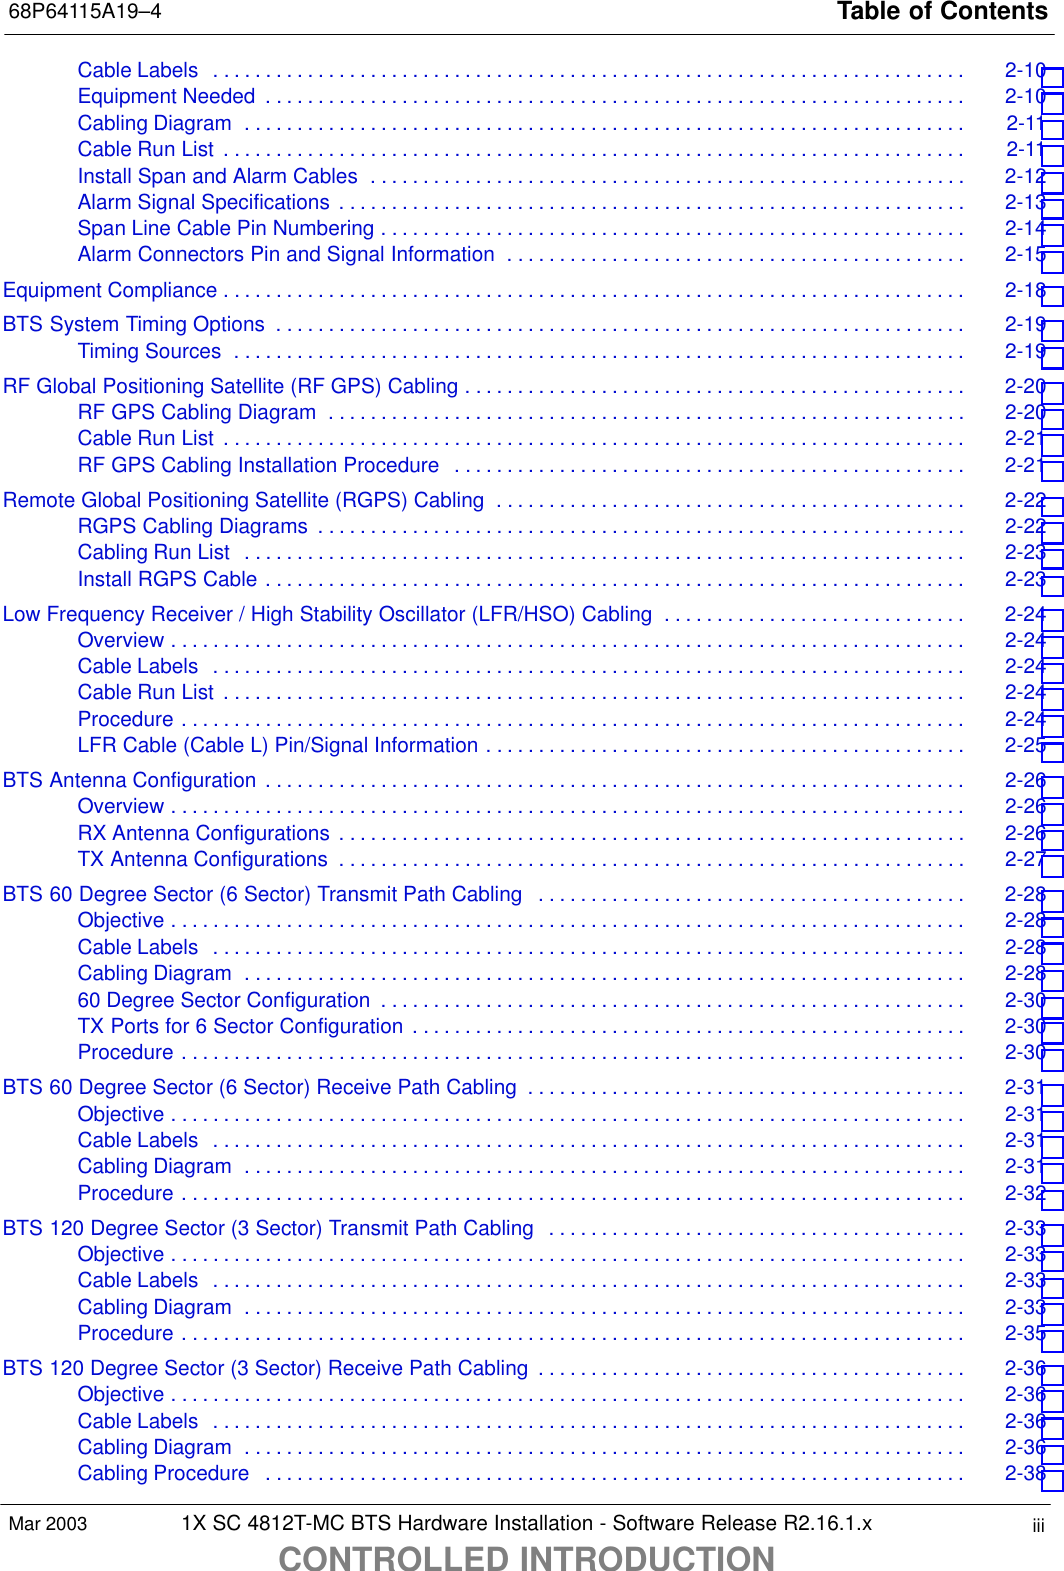 Table of Contents68P64115A19–41X SC 4812T-MC BTS Hardware Installation - Software Release R2.16.1.xCONTROLLED INTRODUCTIONiiiMar 2003Cable Labels 2-10 . . . . . . . . . . . . . . . . . . . . . . . . . . . . . . . . . . . . . . . . . . . . . . . . . . . . . . . . . . . . . . . . . . . . . . . . Equipment Needed 2-10 . . . . . . . . . . . . . . . . . . . . . . . . . . . . . . . . . . . . . . . . . . . . . . . . . . . . . . . . . . . . . . . . . . . Cabling Diagram 2-11 . . . . . . . . . . . . . . . . . . . . . . . . . . . . . . . . . . . . . . . . . . . . . . . . . . . . . . . . . . . . . . . . . . . . . Cable Run List 2-11 . . . . . . . . . . . . . . . . . . . . . . . . . . . . . . . . . . . . . . . . . . . . . . . . . . . . . . . . . . . . . . . . . . . . . . . Install Span and Alarm Cables 2-12 . . . . . . . . . . . . . . . . . . . . . . . . . . . . . . . . . . . . . . . . . . . . . . . . . . . . . . . . . Alarm Signal Specifications 2-13 . . . . . . . . . . . . . . . . . . . . . . . . . . . . . . . . . . . . . . . . . . . . . . . . . . . . . . . . . . . . Span Line Cable Pin Numbering 2-14 . . . . . . . . . . . . . . . . . . . . . . . . . . . . . . . . . . . . . . . . . . . . . . . . . . . . . . . . Alarm Connectors Pin and Signal Information 2-15 . . . . . . . . . . . . . . . . . . . . . . . . . . . . . . . . . . . . . . . . . . . . Equipment Compliance 2-18 . . . . . . . . . . . . . . . . . . . . . . . . . . . . . . . . . . . . . . . . . . . . . . . . . . . . . . . . . . . . . . . . . . . . . . . BTS System Timing Options 2-19 . . . . . . . . . . . . . . . . . . . . . . . . . . . . . . . . . . . . . . . . . . . . . . . . . . . . . . . . . . . . . . . . . . Timing Sources 2-19 . . . . . . . . . . . . . . . . . . . . . . . . . . . . . . . . . . . . . . . . . . . . . . . . . . . . . . . . . . . . . . . . . . . . . . RF Global Positioning Satellite (RF GPS) Cabling 2-20 . . . . . . . . . . . . . . . . . . . . . . . . . . . . . . . . . . . . . . . . . . . . . . . . RF GPS Cabling Diagram 2-20 . . . . . . . . . . . . . . . . . . . . . . . . . . . . . . . . . . . . . . . . . . . . . . . . . . . . . . . . . . . . . Cable Run List 2-21 . . . . . . . . . . . . . . . . . . . . . . . . . . . . . . . . . . . . . . . . . . . . . . . . . . . . . . . . . . . . . . . . . . . . . . . RF GPS Cabling Installation Procedure 2-21 . . . . . . . . . . . . . . . . . . . . . . . . . . . . . . . . . . . . . . . . . . . . . . . . . Remote Global Positioning Satellite (RGPS) Cabling 2-22 . . . . . . . . . . . . . . . . . . . . . . . . . . . . . . . . . . . . . . . . . . . . . RGPS Cabling Diagrams 2-22 . . . . . . . . . . . . . . . . . . . . . . . . . . . . . . . . . . . . . . . . . . . . . . . . . . . . . . . . . . . . . . Cabling Run List 2-23 . . . . . . . . . . . . . . . . . . . . . . . . . . . . . . . . . . . . . . . . . . . . . . . . . . . . . . . . . . . . . . . . . . . . . Install RGPS Cable 2-23 . . . . . . . . . . . . . . . . . . . . . . . . . . . . . . . . . . . . . . . . . . . . . . . . . . . . . . . . . . . . . . . . . . . Low Frequency Receiver / High Stability Oscillator (LFR/HSO) Cabling 2-24 . . . . . . . . . . . . . . . . . . . . . . . . . . . . . Overview 2-24 . . . . . . . . . . . . . . . . . . . . . . . . . . . . . . . . . . . . . . . . . . . . . . . . . . . . . . . . . . . . . . . . . . . . . . . . . . . . Cable Labels 2-24 . . . . . . . . . . . . . . . . . . . . . . . . . . . . . . . . . . . . . . . . . . . . . . . . . . . . . . . . . . . . . . . . . . . . . . . . Cable Run List 2-24 . . . . . . . . . . . . . . . . . . . . . . . . . . . . . . . . . . . . . . . . . . . . . . . . . . . . . . . . . . . . . . . . . . . . . . . Procedure 2-24 . . . . . . . . . . . . . . . . . . . . . . . . . . . . . . . . . . . . . . . . . . . . . . . . . . . . . . . . . . . . . . . . . . . . . . . . . . . LFR Cable (Cable L) Pin/Signal Information 2-25 . . . . . . . . . . . . . . . . . . . . . . . . . . . . . . . . . . . . . . . . . . . . . . BTS Antenna Configuration 2-26 . . . . . . . . . . . . . . . . . . . . . . . . . . . . . . . . . . . . . . . . . . . . . . . . . . . . . . . . . . . . . . . . . . . Overview 2-26 . . . . . . . . . . . . . . . . . . . . . . . . . . . . . . . . . . . . . . . . . . . . . . . . . . . . . . . . . . . . . . . . . . . . . . . . . . . . RX Antenna Configurations 2-26 . . . . . . . . . . . . . . . . . . . . . . . . . . . . . . . . . . . . . . . . . . . . . . . . . . . . . . . . . . . . TX Antenna Configurations 2-27 . . . . . . . . . . . . . . . . . . . . . . . . . . . . . . . . . . . . . . . . . . . . . . . . . . . . . . . . . . . . BTS 60 Degree Sector (6 Sector) Transmit Path Cabling 2-28 . . . . . . . . . . . . . . . . . . . . . . . . . . . . . . . . . . . . . . . . . Objective 2-28 . . . . . . . . . . . . . . . . . . . . . . . . . . . . . . . . . . . . . . . . . . . . . . . . . . . . . . . . . . . . . . . . . . . . . . . . . . . . Cable Labels 2-28 . . . . . . . . . . . . . . . . . . . . . . . . . . . . . . . . . . . . . . . . . . . . . . . . . . . . . . . . . . . . . . . . . . . . . . . . Cabling Diagram 2-28 . . . . . . . . . . . . . . . . . . . . . . . . . . . . . . . . . . . . . . . . . . . . . . . . . . . . . . . . . . . . . . . . . . . . . 60 Degree Sector Configuration 2-30 . . . . . . . . . . . . . . . . . . . . . . . . . . . . . . . . . . . . . . . . . . . . . . . . . . . . . . . . TX Ports for 6 Sector Configuration 2-30 . . . . . . . . . . . . . . . . . . . . . . . . . . . . . . . . . . . . . . . . . . . . . . . . . . . . . Procedure 2-30 . . . . . . . . . . . . . . . . . . . . . . . . . . . . . . . . . . . . . . . . . . . . . . . . . . . . . . . . . . . . . . . . . . . . . . . . . . . BTS 60 Degree Sector (6 Sector) Receive Path Cabling 2-31 . . . . . . . . . . . . . . . . . . . . . . . . . . . . . . . . . . . . . . . . . . Objective 2-31 . . . . . . . . . . . . . . . . . . . . . . . . . . . . . . . . . . . . . . . . . . . . . . . . . . . . . . . . . . . . . . . . . . . . . . . . . . . . Cable Labels 2-31 . . . . . . . . . . . . . . . . . . . . . . . . . . . . . . . . . . . . . . . . . . . . . . . . . . . . . . . . . . . . . . . . . . . . . . . . Cabling Diagram 2-31 . . . . . . . . . . . . . . . . . . . . . . . . . . . . . . . . . . . . . . . . . . . . . . . . . . . . . . . . . . . . . . . . . . . . . Procedure 2-32 . . . . . . . . . . . . . . . . . . . . . . . . . . . . . . . . . . . . . . . . . . . . . . . . . . . . . . . . . . . . . . . . . . . . . . . . . . . BTS 120 Degree Sector (3 Sector) Transmit Path Cabling 2-33 . . . . . . . . . . . . . . . . . . . . . . . . . . . . . . . . . . . . . . . . Objective 2-33 . . . . . . . . . . . . . . . . . . . . . . . . . . . . . . . . . . . . . . . . . . . . . . . . . . . . . . . . . . . . . . . . . . . . . . . . . . . . Cable Labels 2-33 . . . . . . . . . . . . . . . . . . . . . . . . . . . . . . . . . . . . . . . . . . . . . . . . . . . . . . . . . . . . . . . . . . . . . . . . Cabling Diagram 2-33 . . . . . . . . . . . . . . . . . . . . . . . . . . . . . . . . . . . . . . . . . . . . . . . . . . . . . . . . . . . . . . . . . . . . . Procedure 2-35 . . . . . . . . . . . . . . . . . . . . . . . . . . . . . . . . . . . . . . . . . . . . . . . . . . . . . . . . . . . . . . . . . . . . . . . . . . . BTS 120 Degree Sector (3 Sector) Receive Path Cabling 2-36 . . . . . . . . . . . . . . . . . . . . . . . . . . . . . . . . . . . . . . . . . Objective 2-36 . . . . . . . . . . . . . . . . . . . . . . . . . . . . . . . . . . . . . . . . . . . . . . . . . . . . . . . . . . . . . . . . . . . . . . . . . . . . Cable Labels 2-36 . . . . . . . . . . . . . . . . . . . . . . . . . . . . . . . . . . . . . . . . . . . . . . . . . . . . . . . . . . . . . . . . . . . . . . . . Cabling Diagram 2-36 . . . . . . . . . . . . . . . . . . . . . . . . . . . . . . . . . . . . . . . . . . . . . . . . . . . . . . . . . . . . . . . . . . . . . Cabling Procedure 2-38 . . . . . . . . . . . . . . . . . . . . . . . . . . . . . . . . . . . . . . . . . . . . . . . . . . . . . . . . . . . . . . . . . . . 